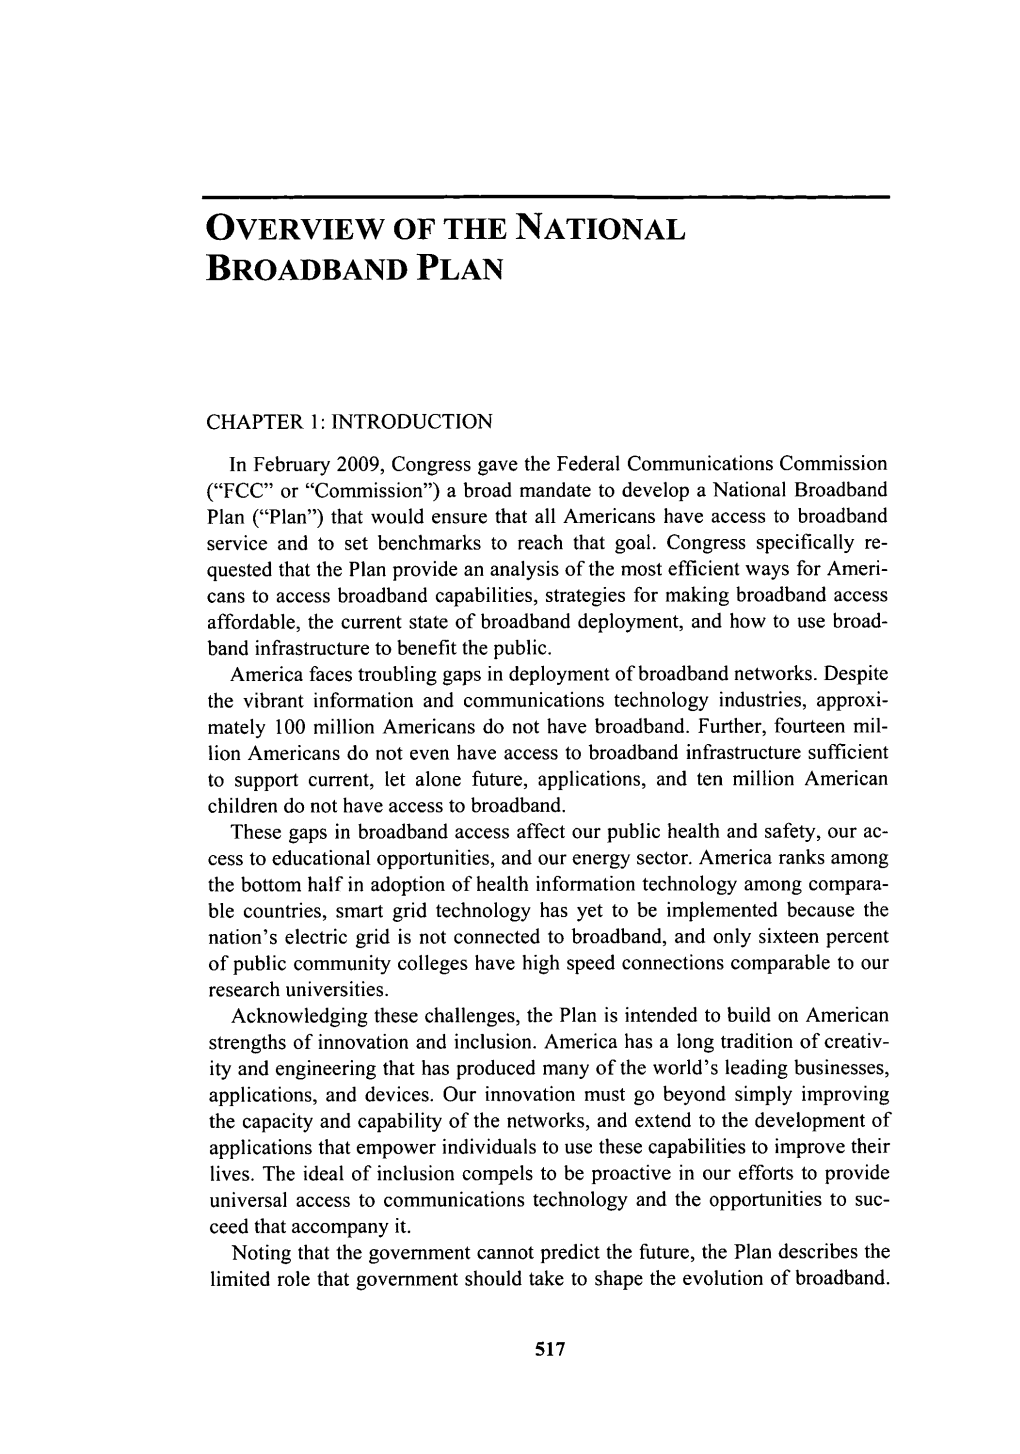 Overview of the National Broadband Plan